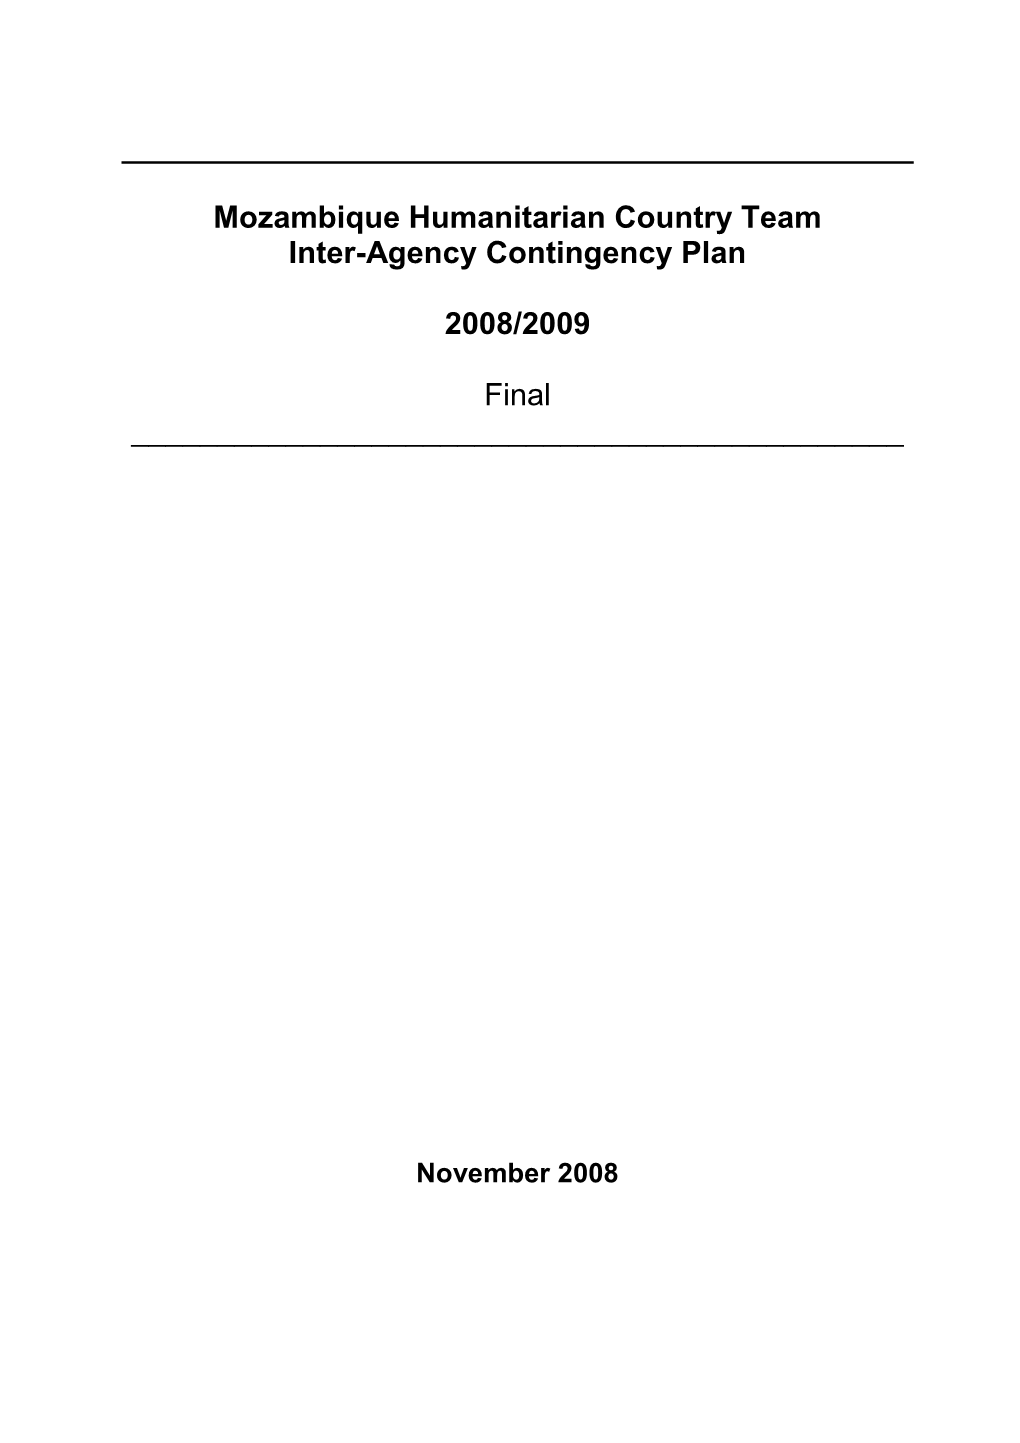 Mozambique HCT Inter-Agency Contingency Plan 2008-2009